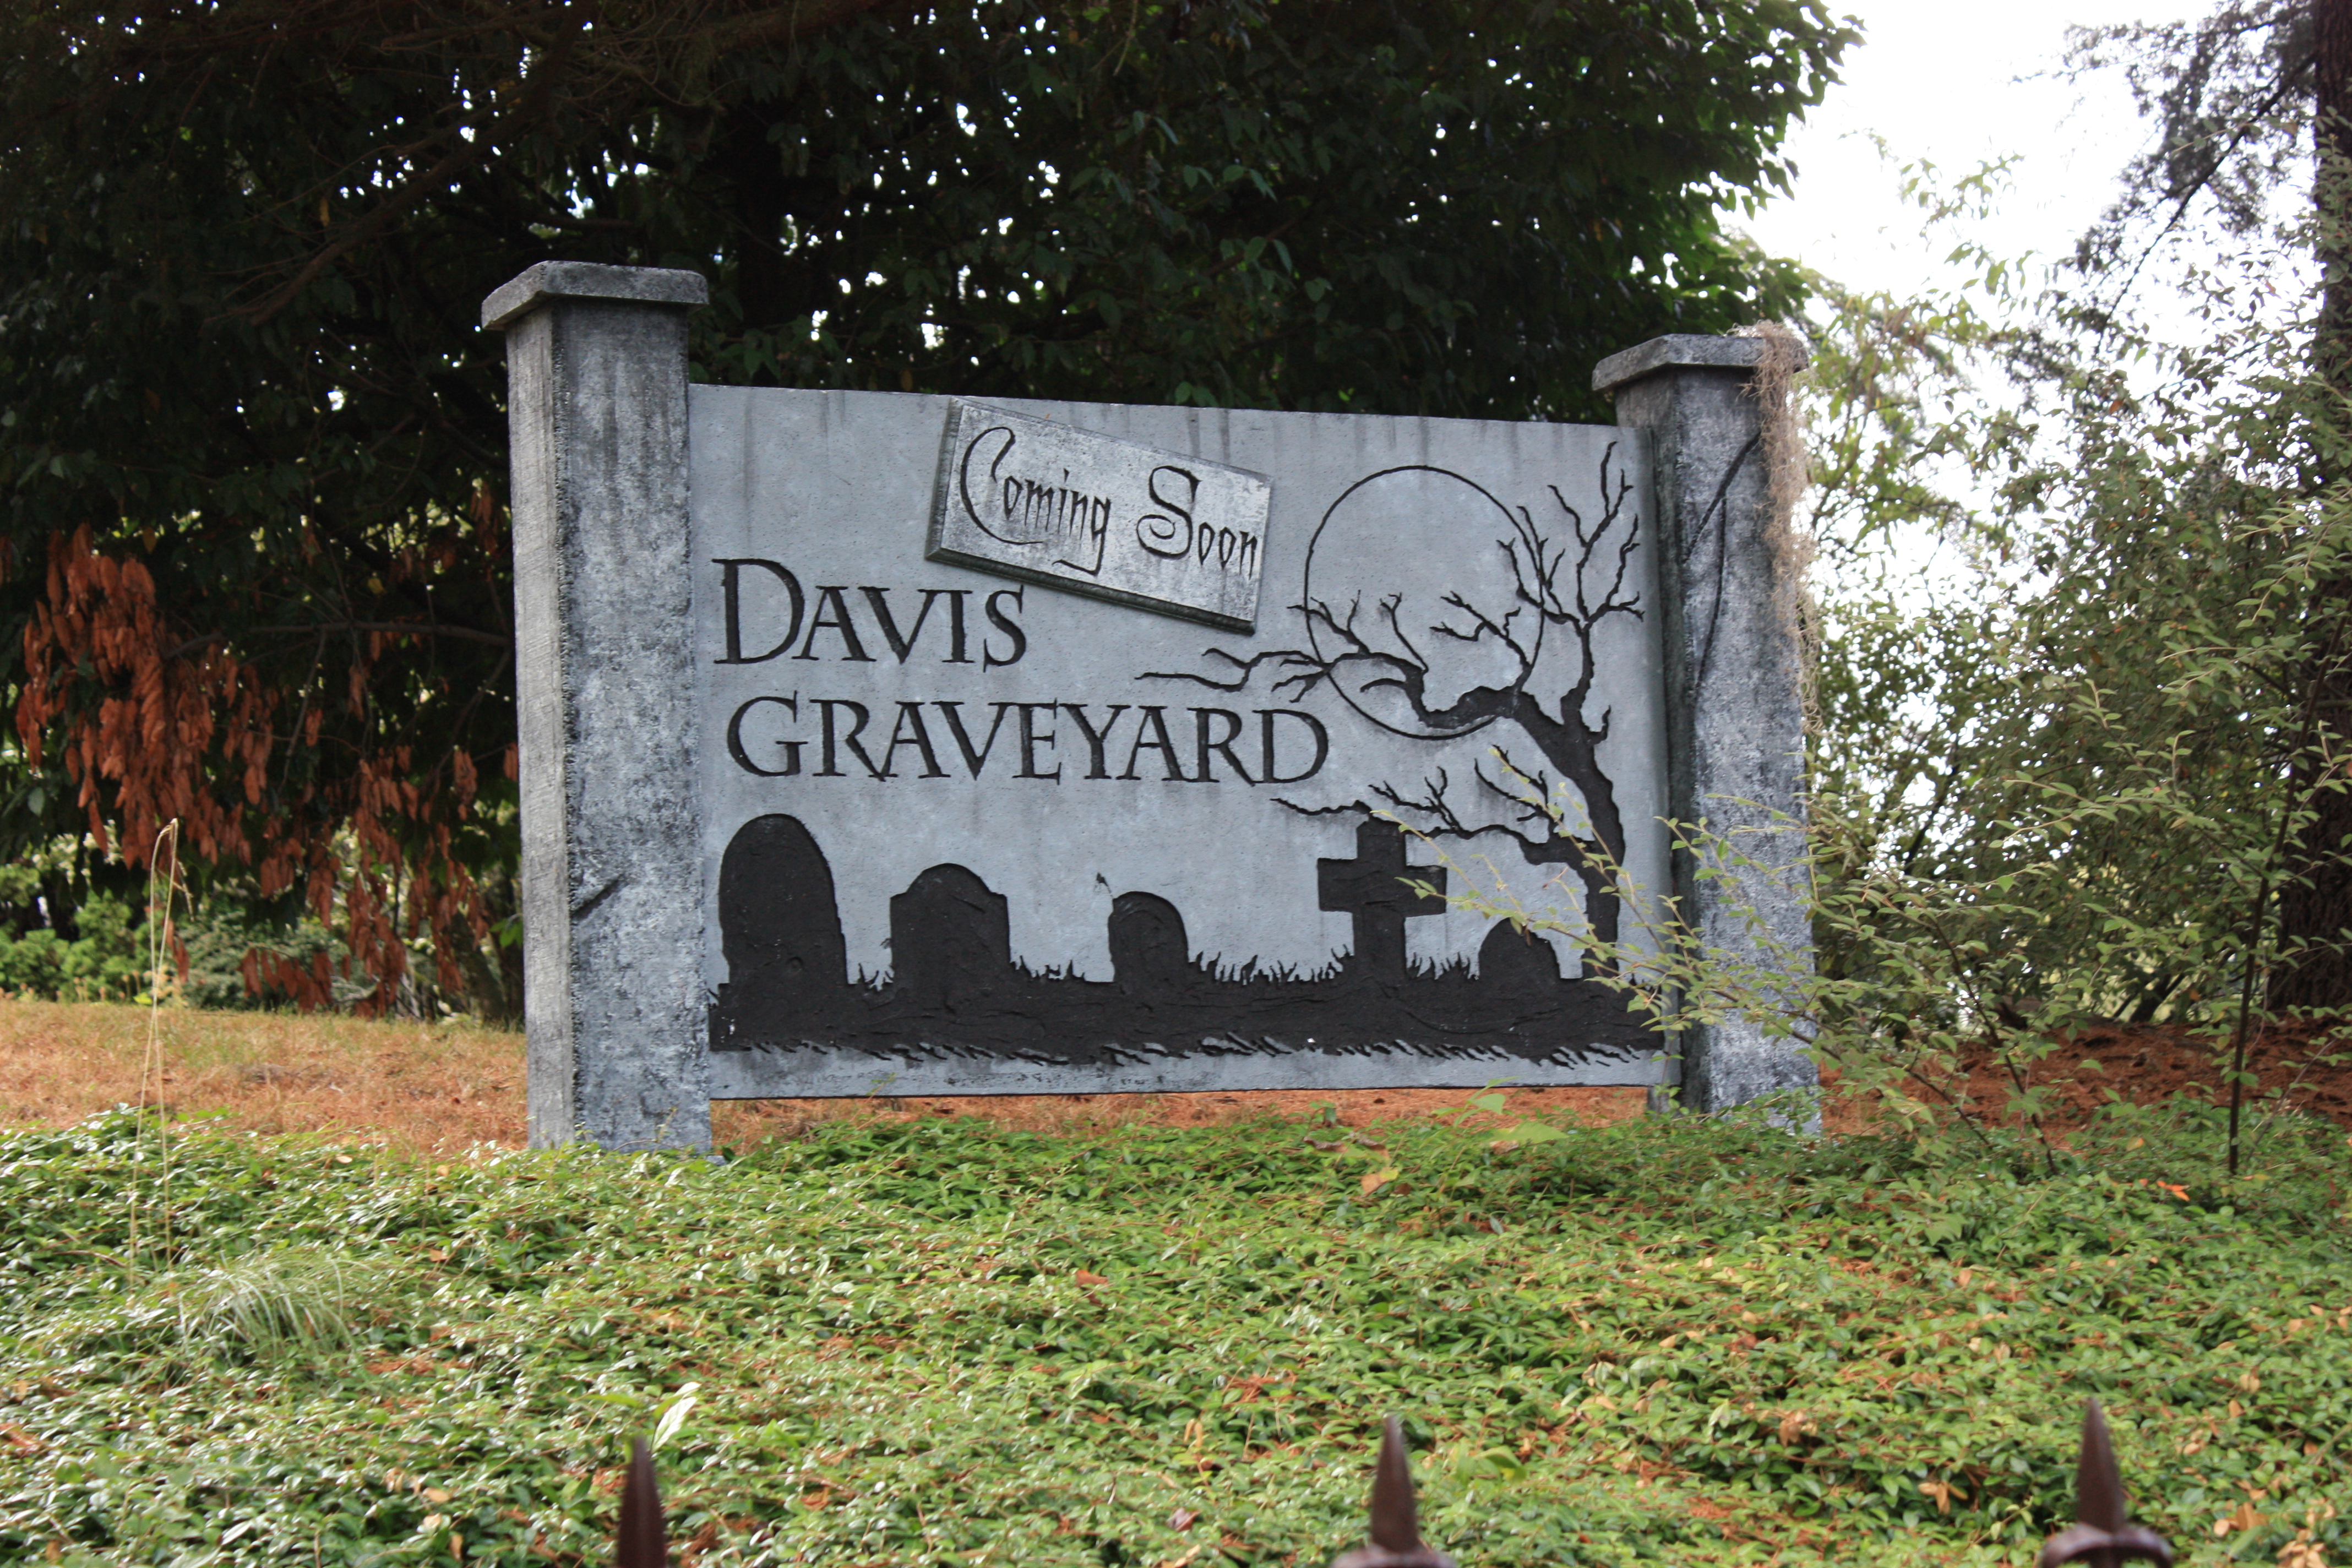 The Graveyard is coming soon